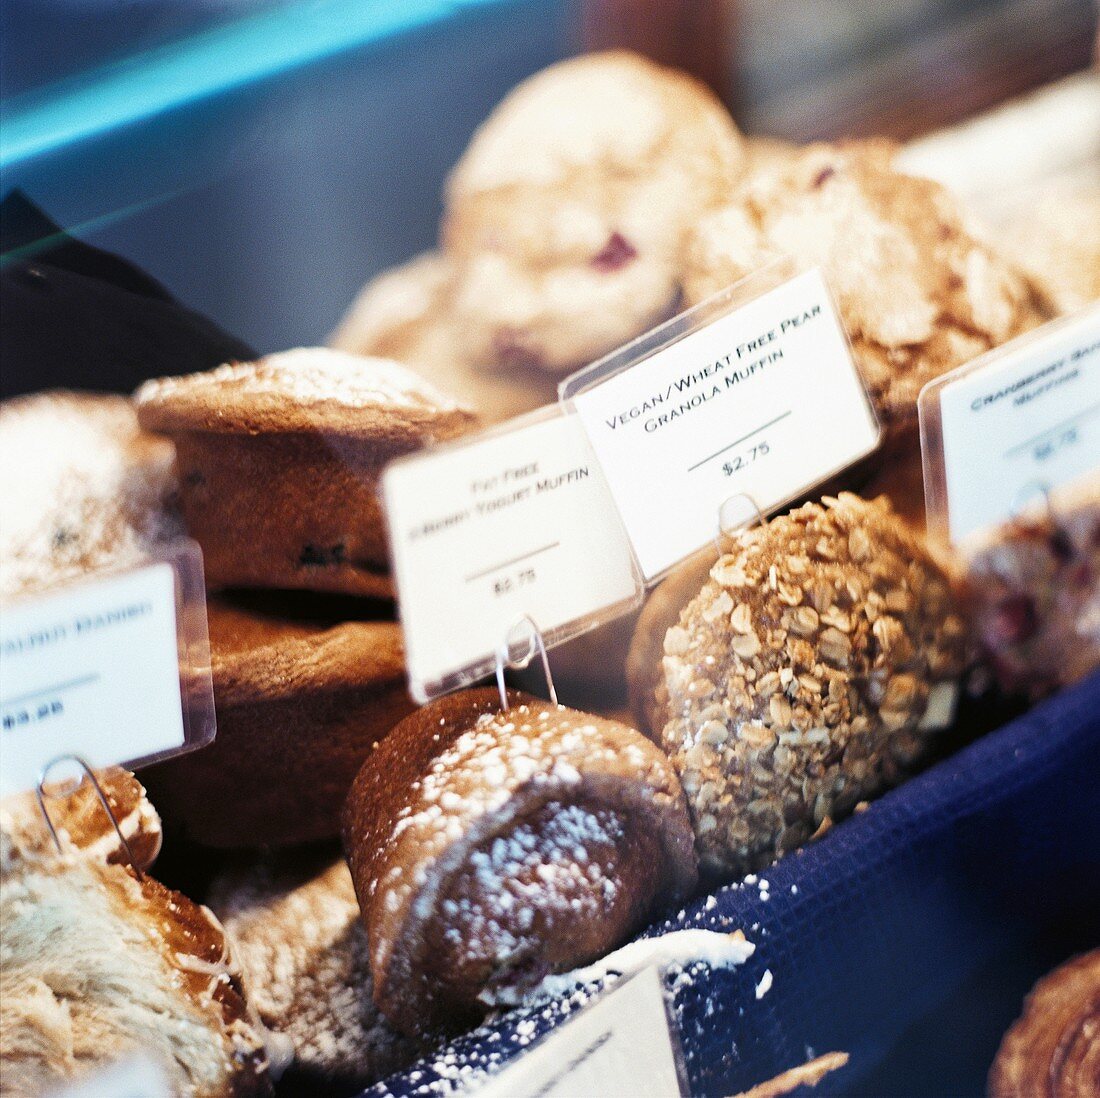 Various baked goods with price labels